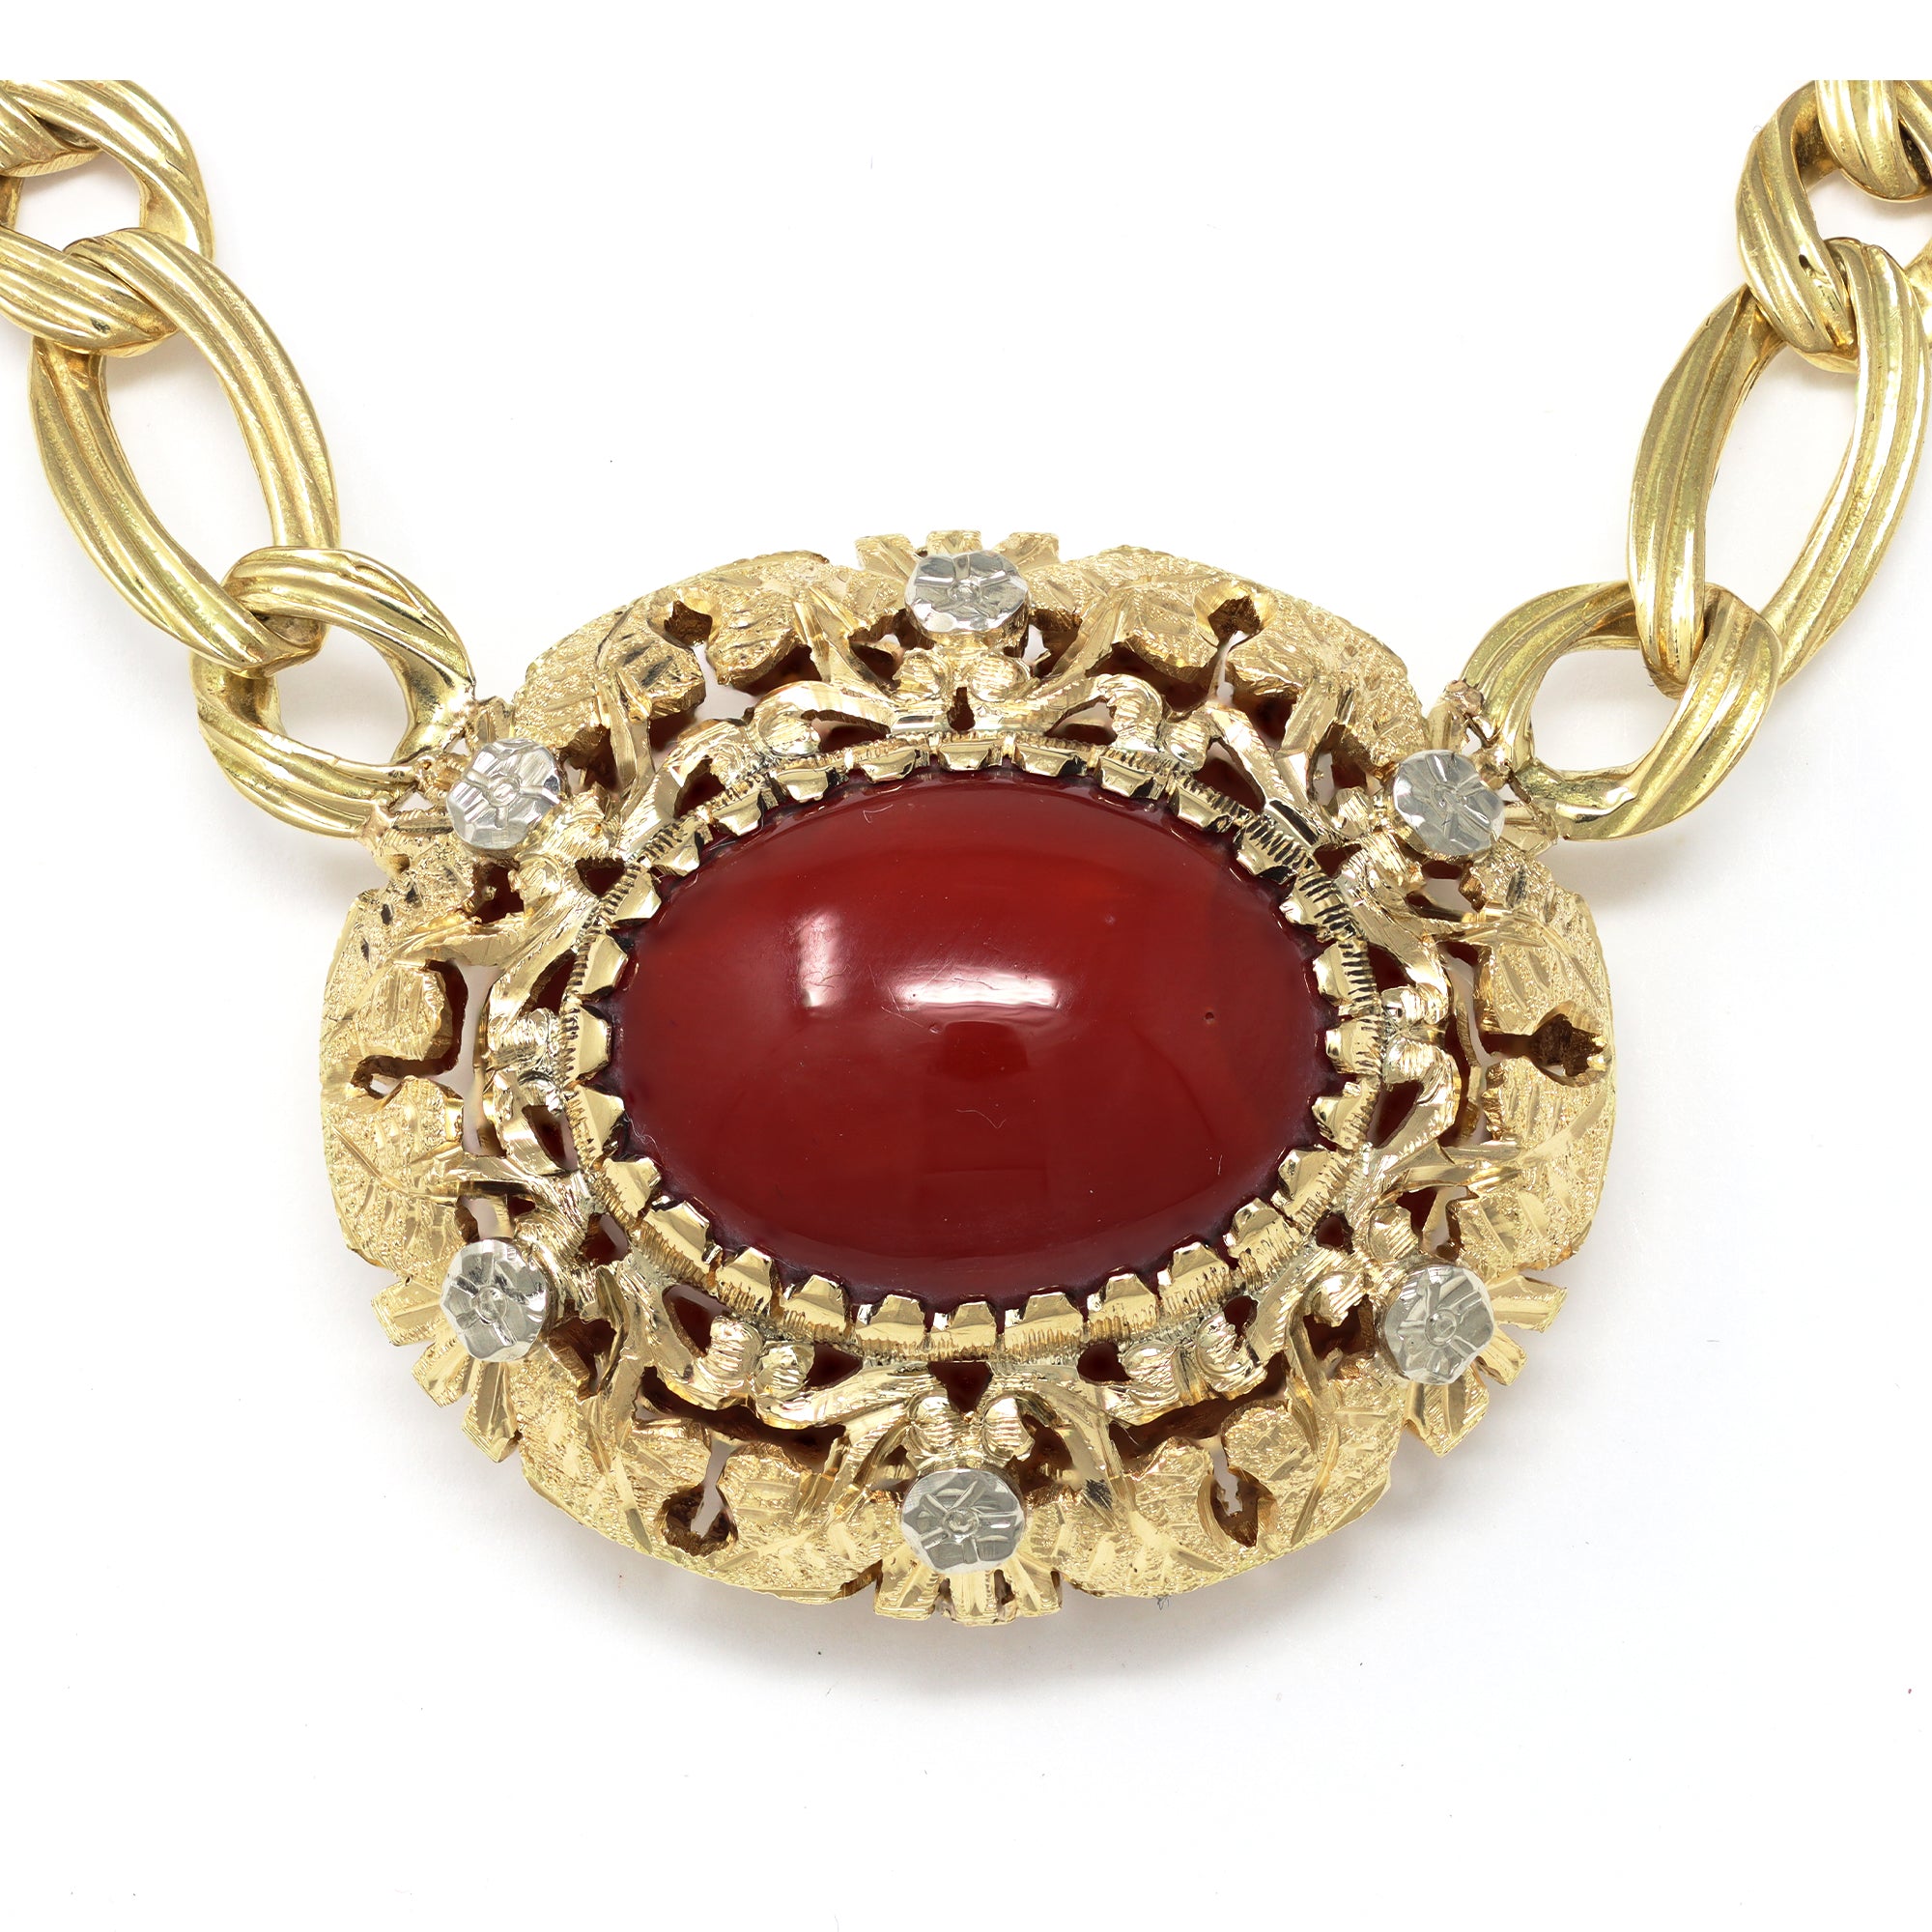 1960s-italian-oxblood-cabochon-coral-and-18-karat-yellow-gold-necklace-coral-close-up-view-2000x2000